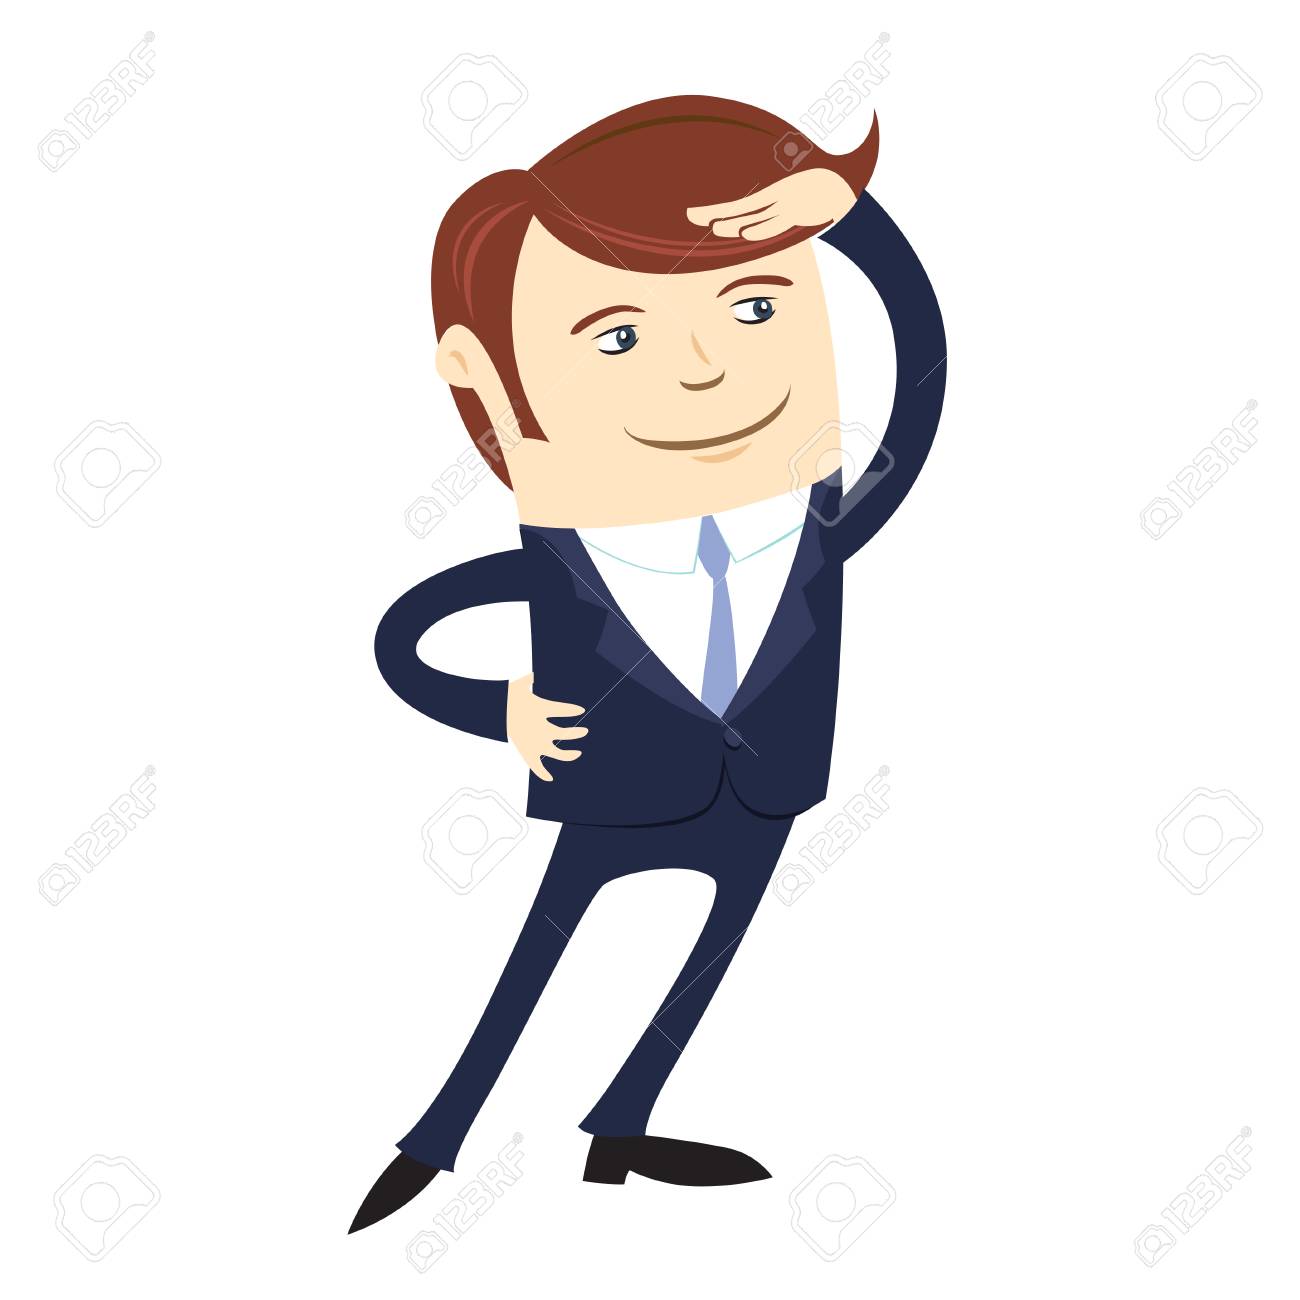 Vector illustration Funny business man wearing suit looking forward.